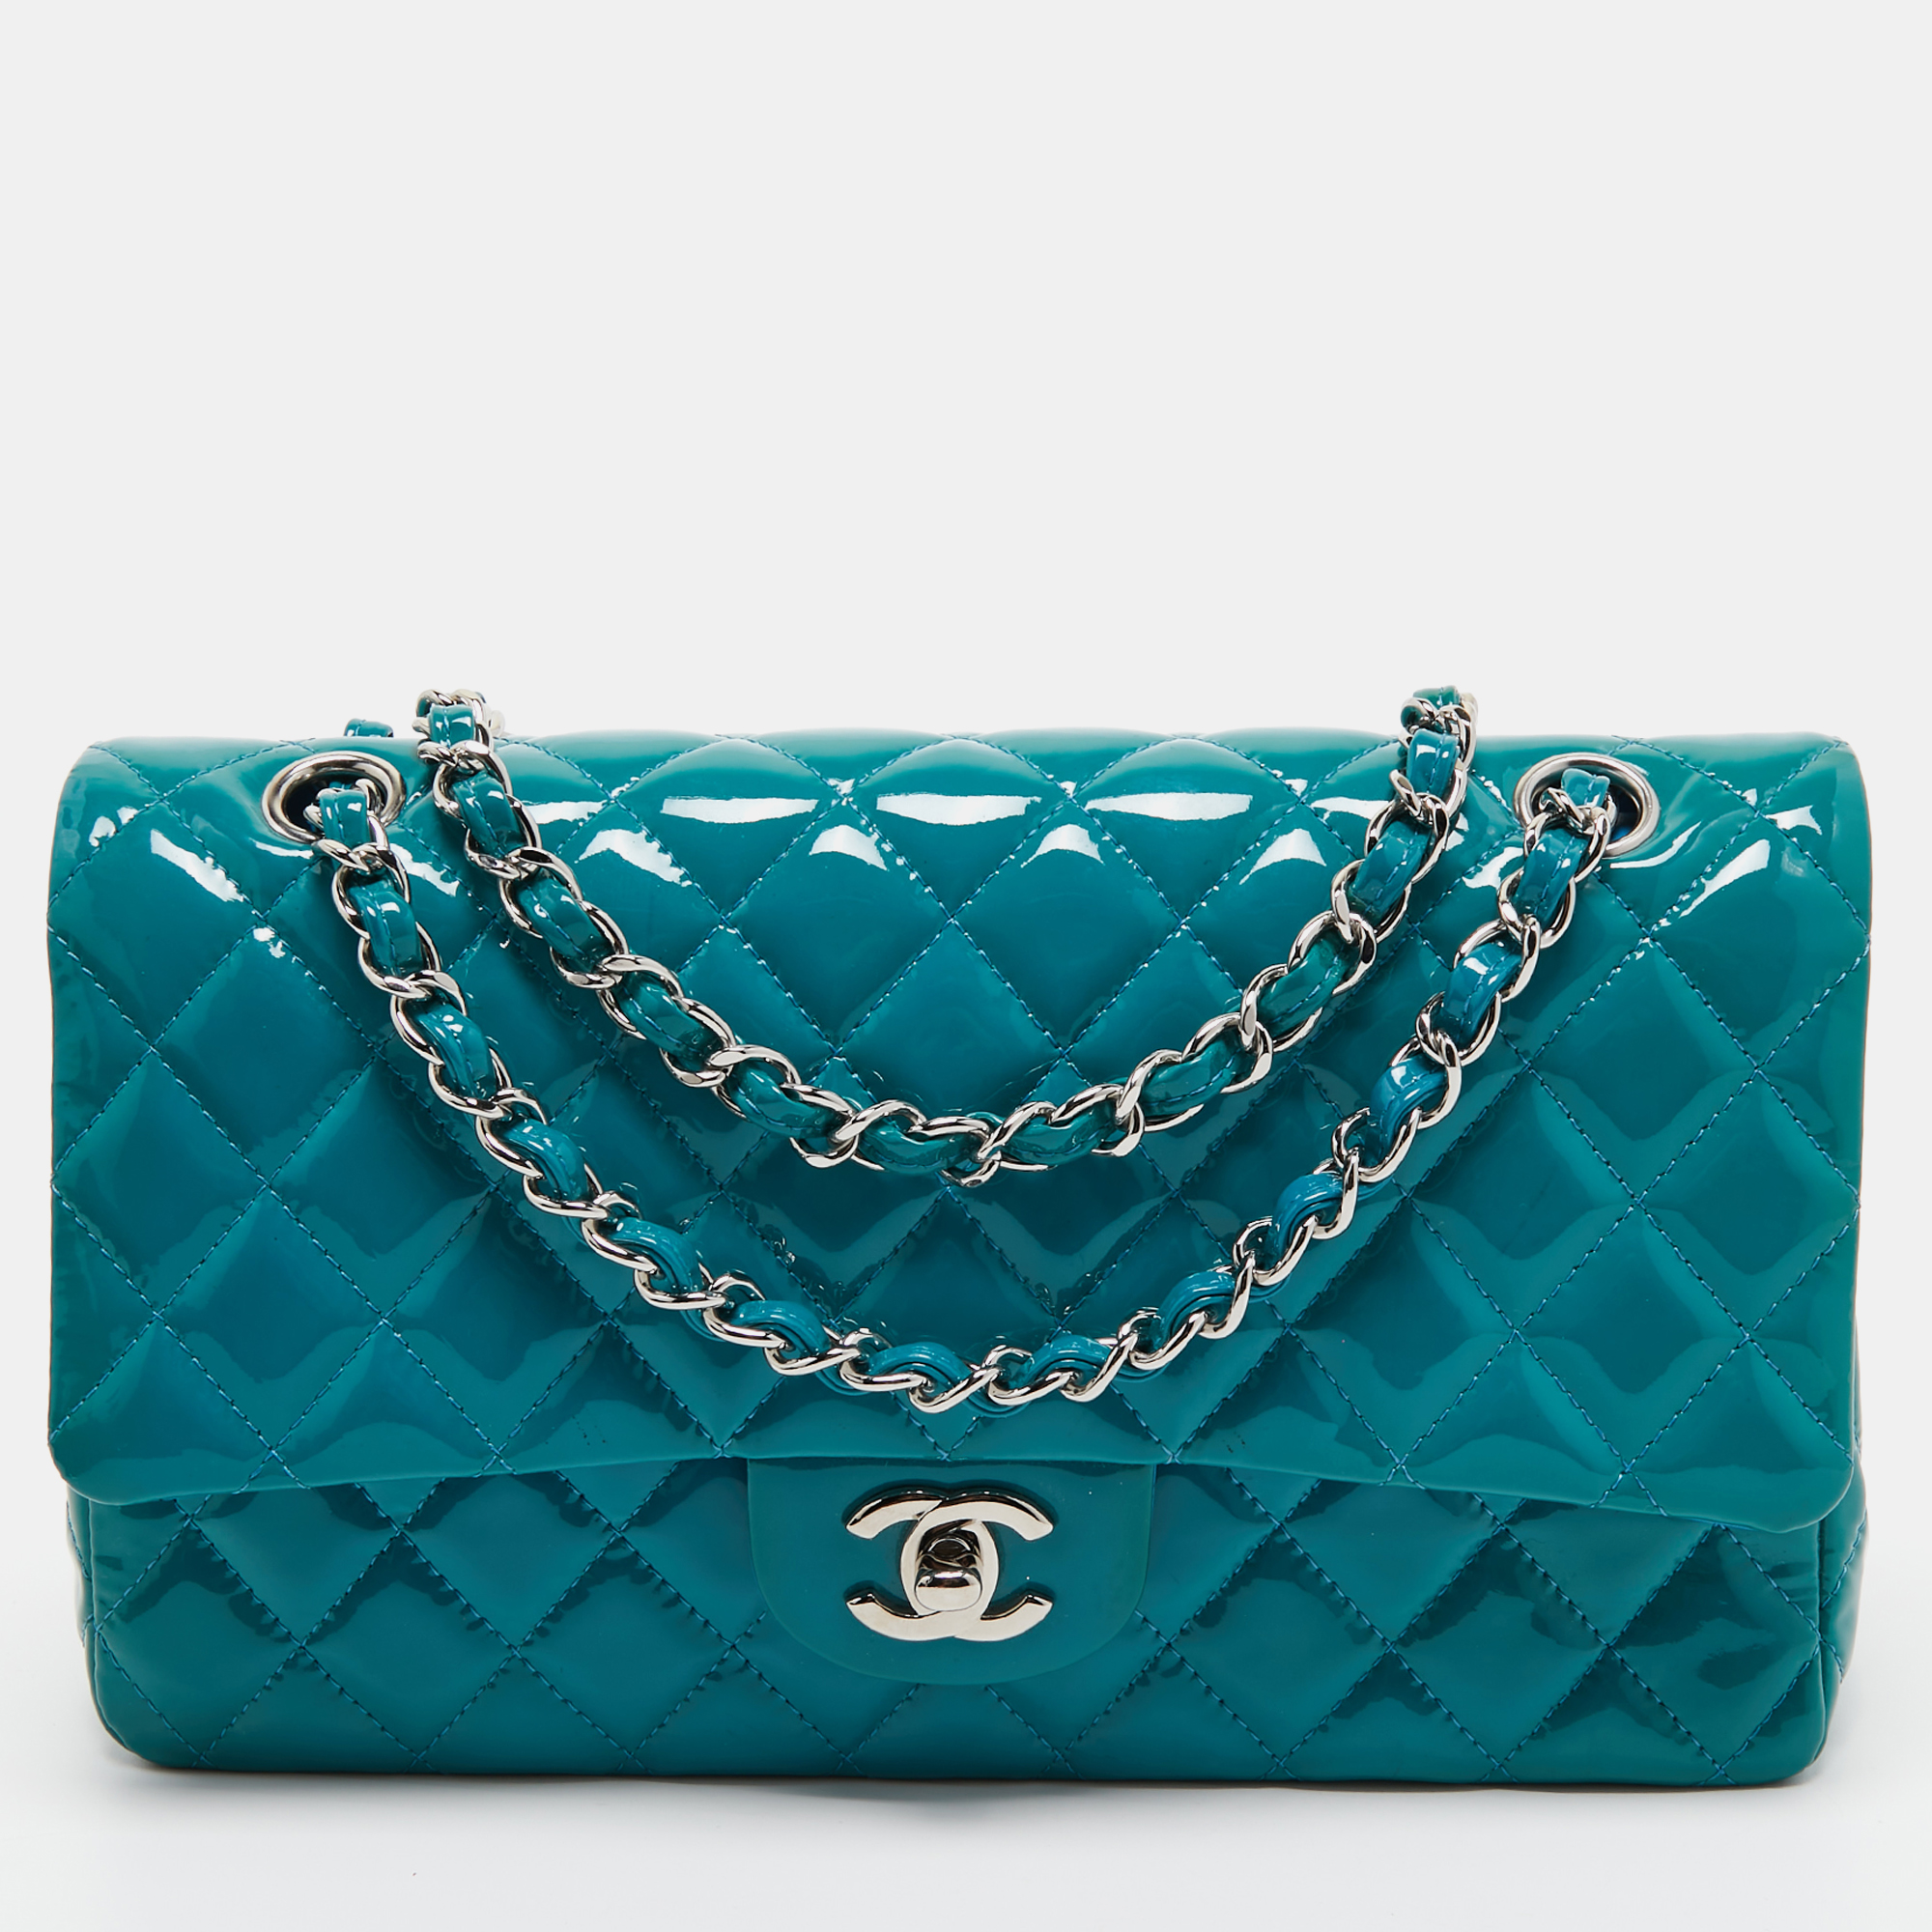 Pre-owned Chanel Teal Blue Quilted Patent Leather Medium Classic Double Flap Bag